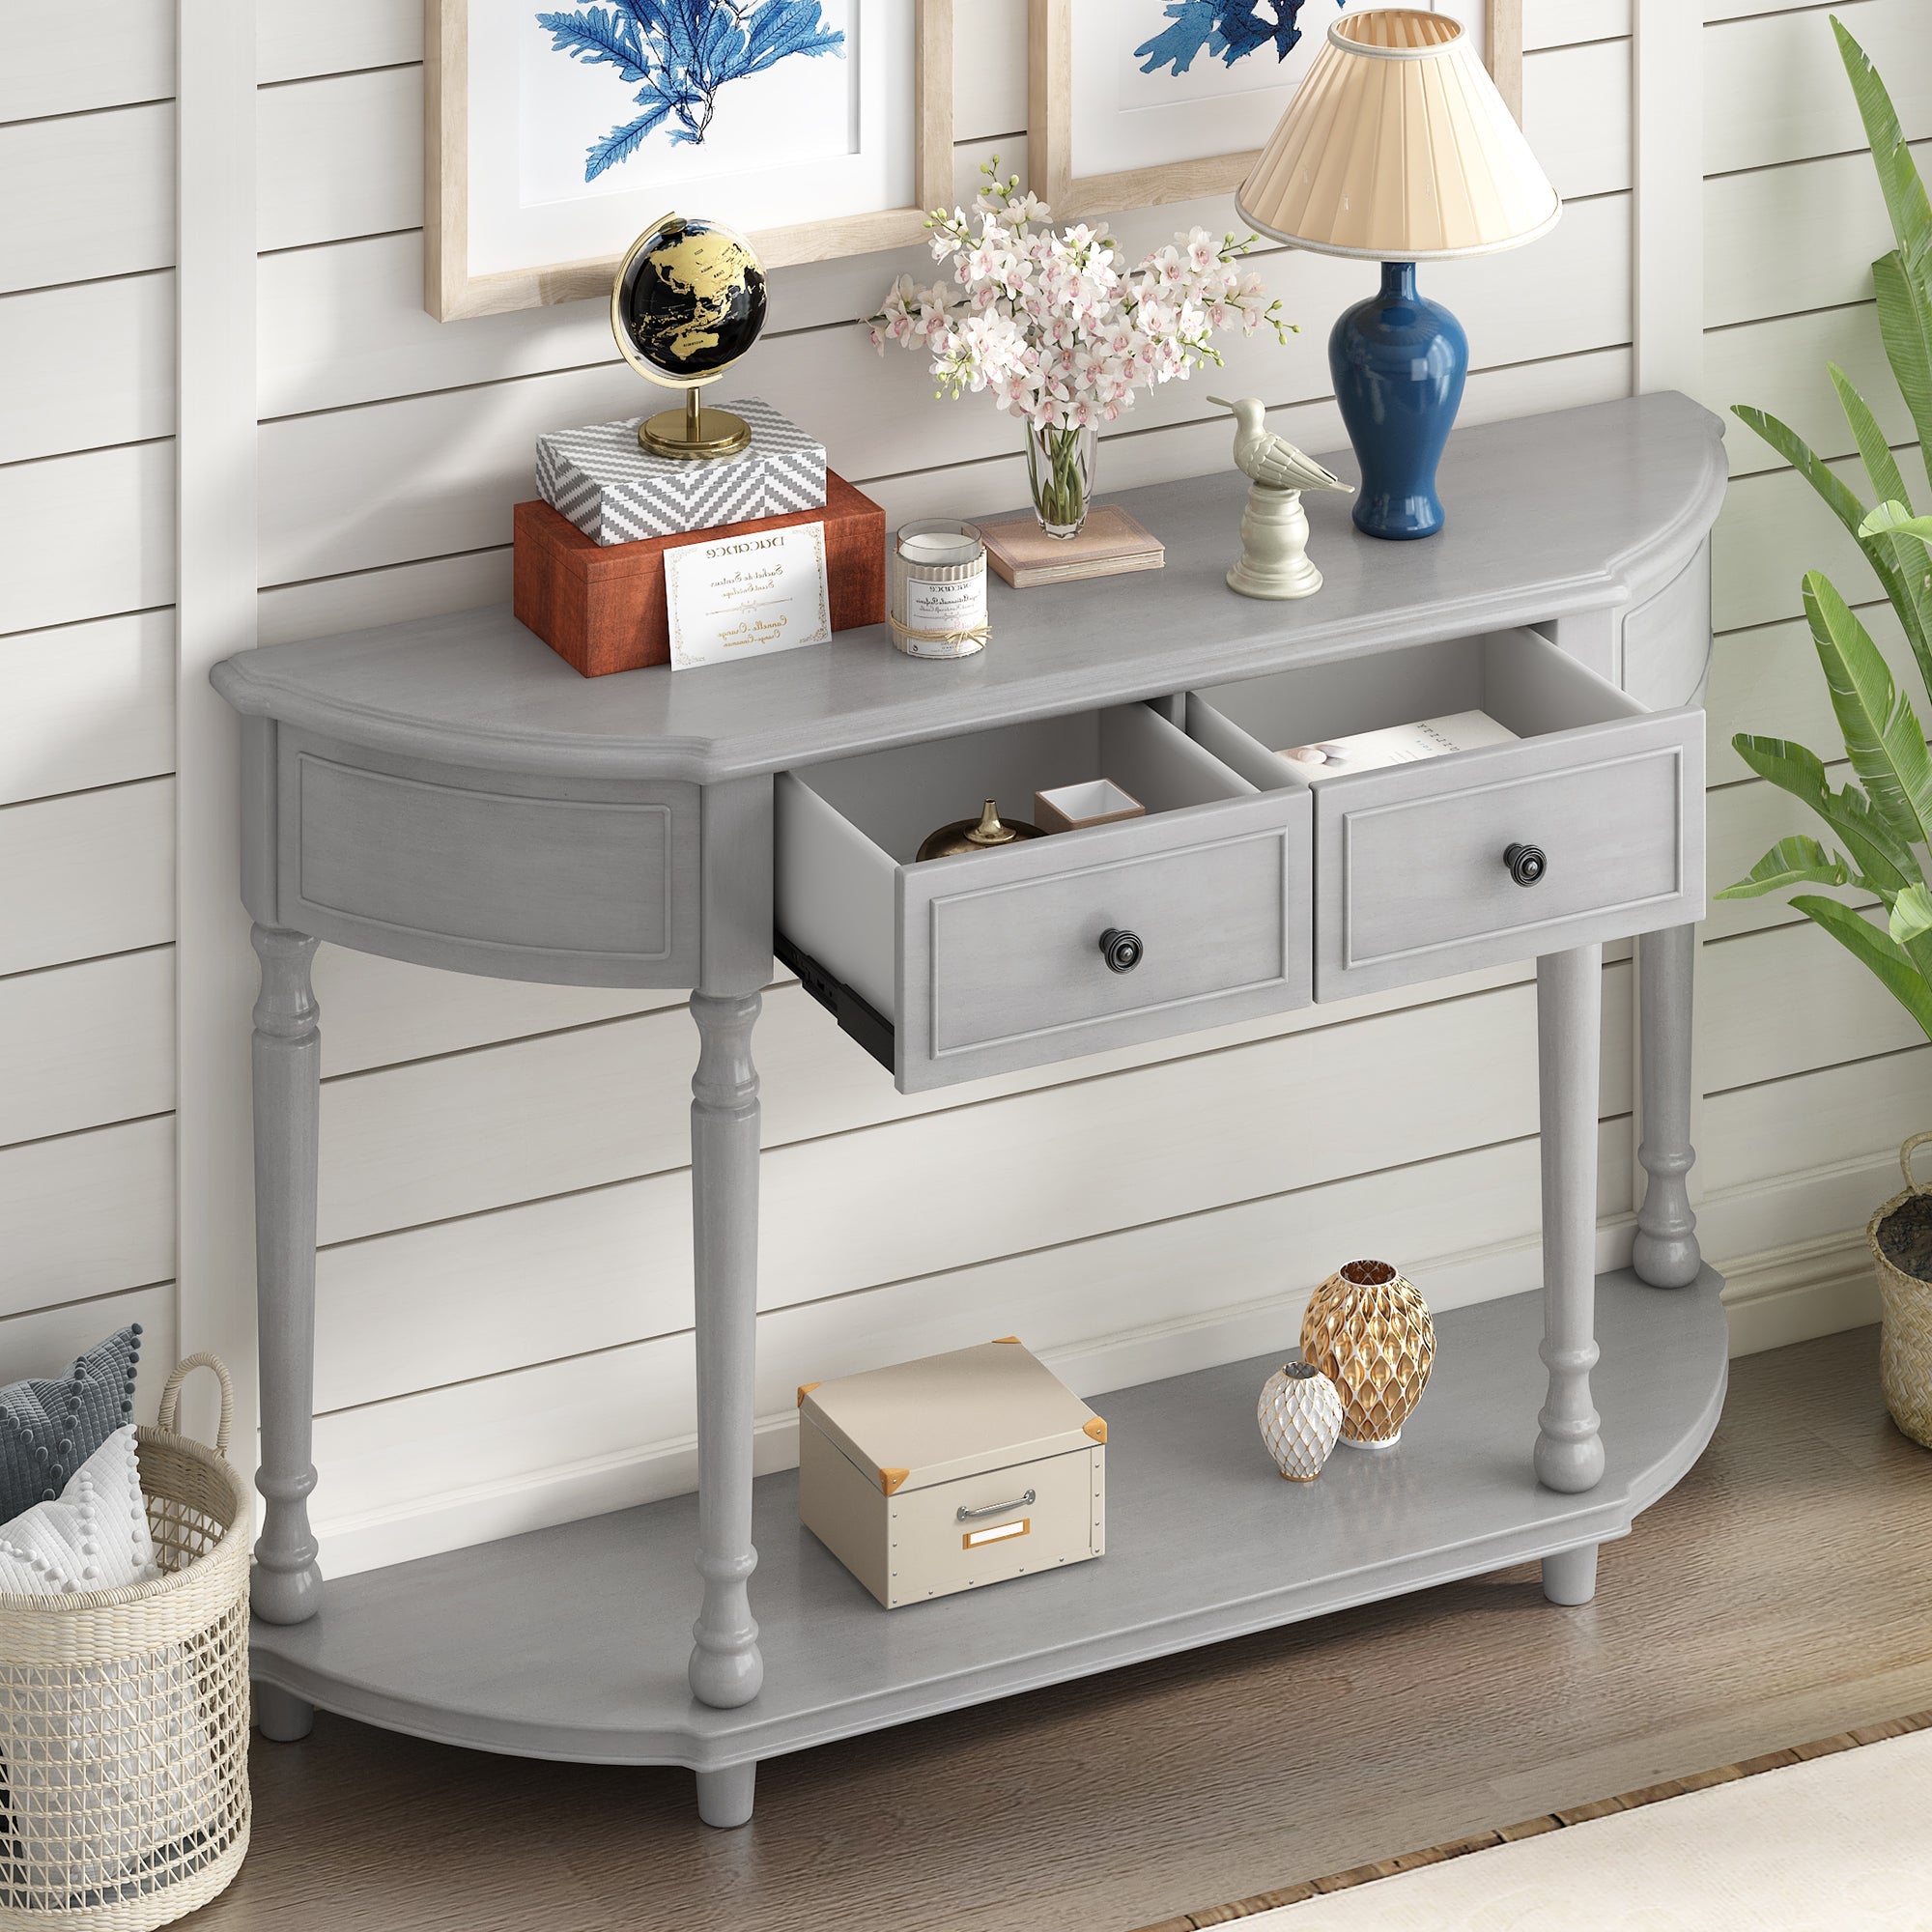 Sanctuary Console Table with Open Style Shelf, Solid Wooden Frame and 2 Top Drawers - Consoles